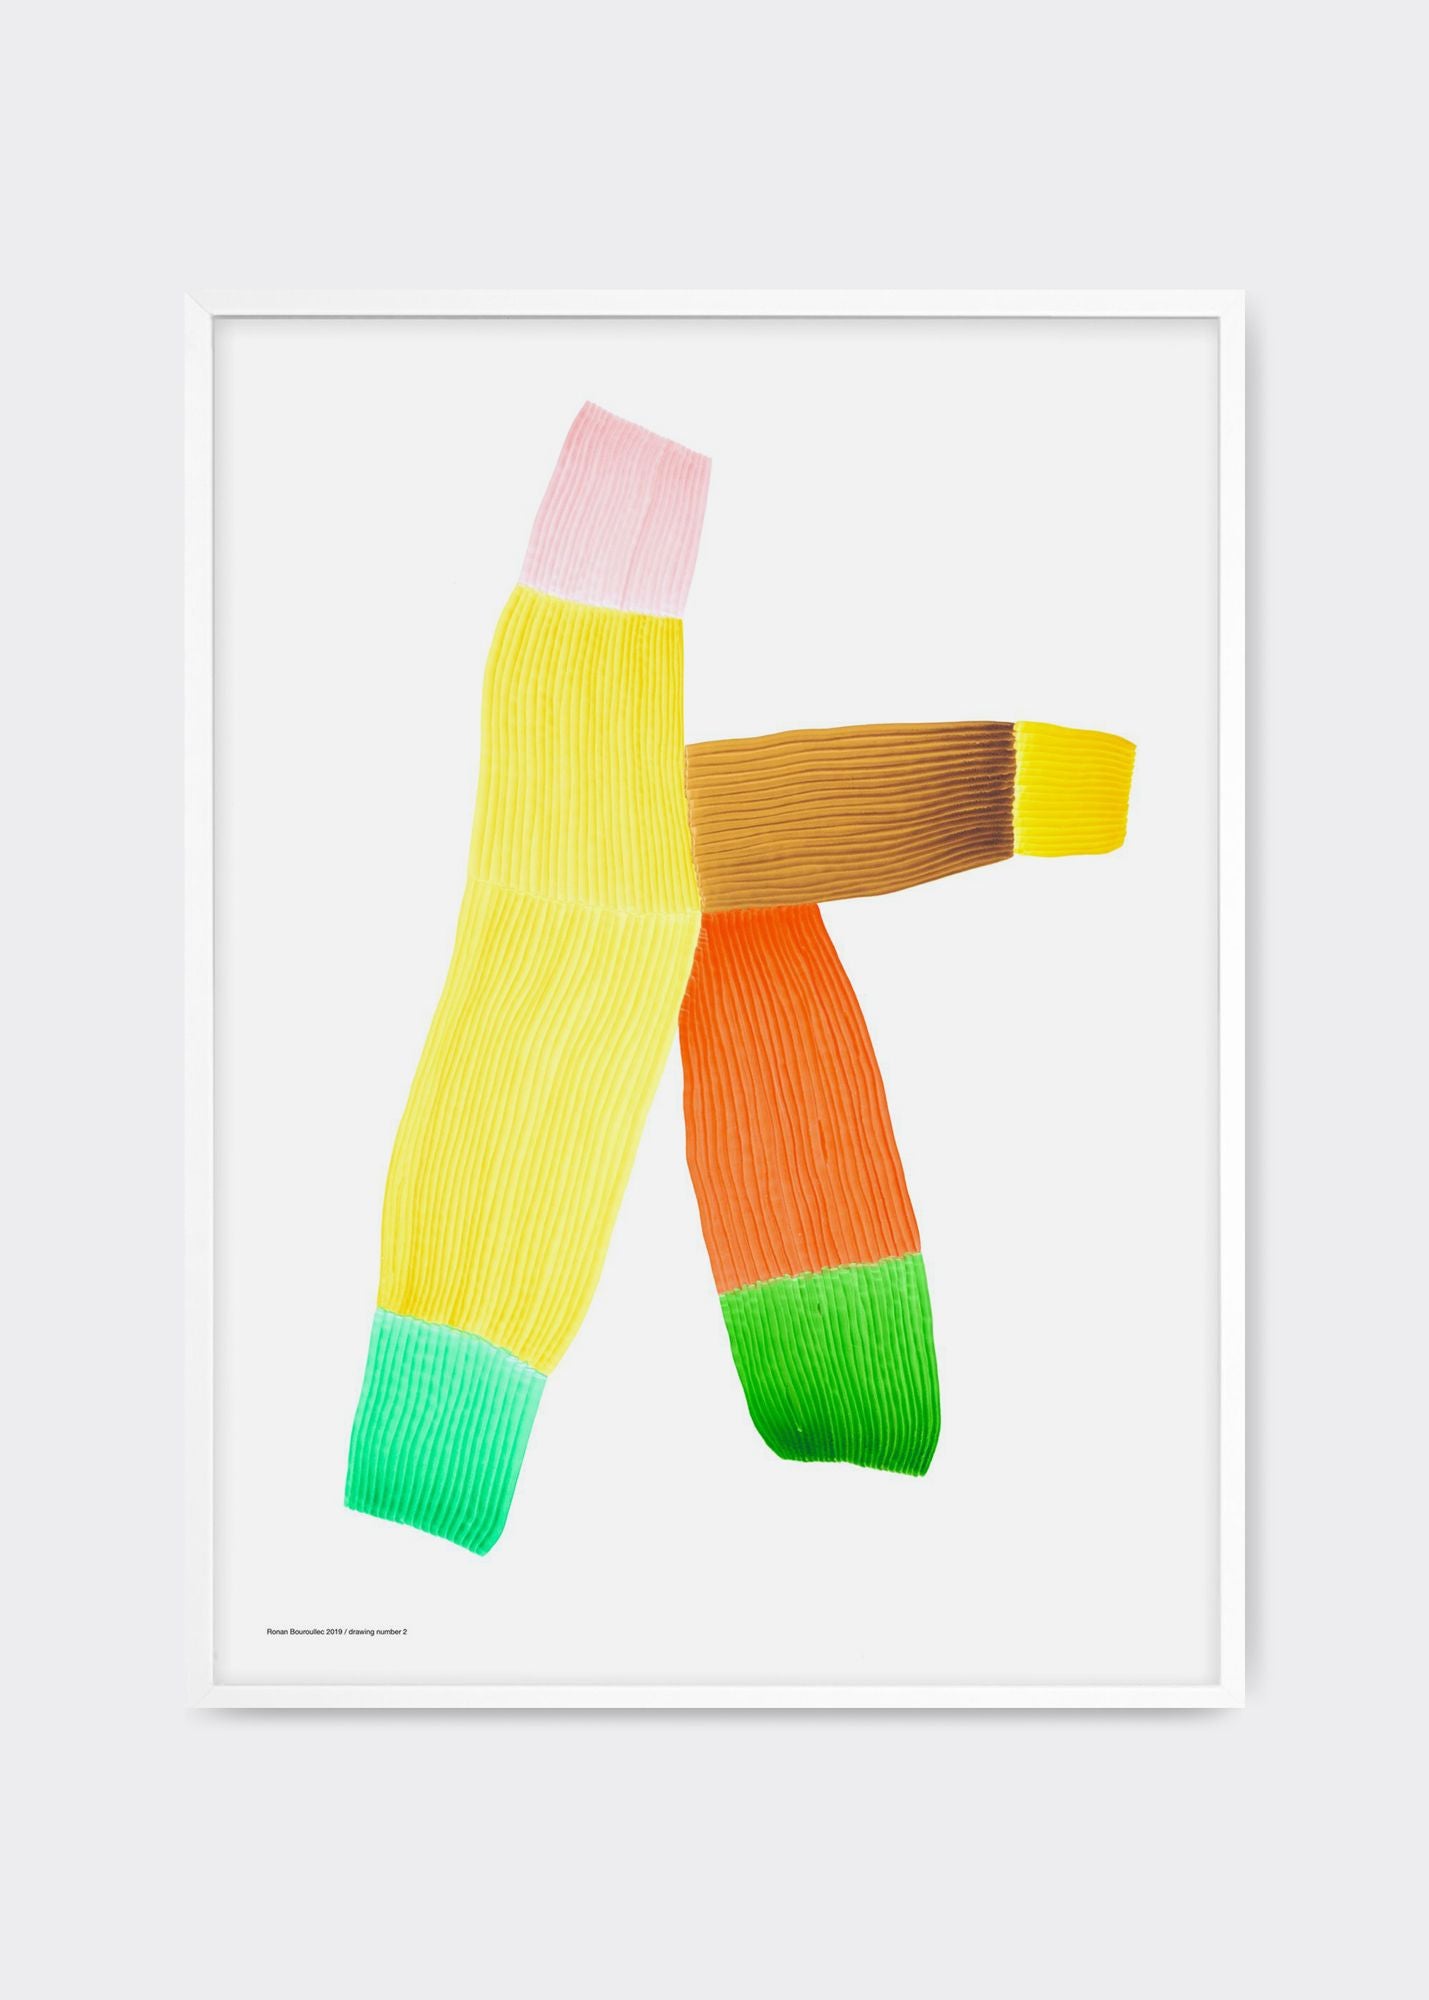 Ronan Bouroullec - Drawing 2 - Framed